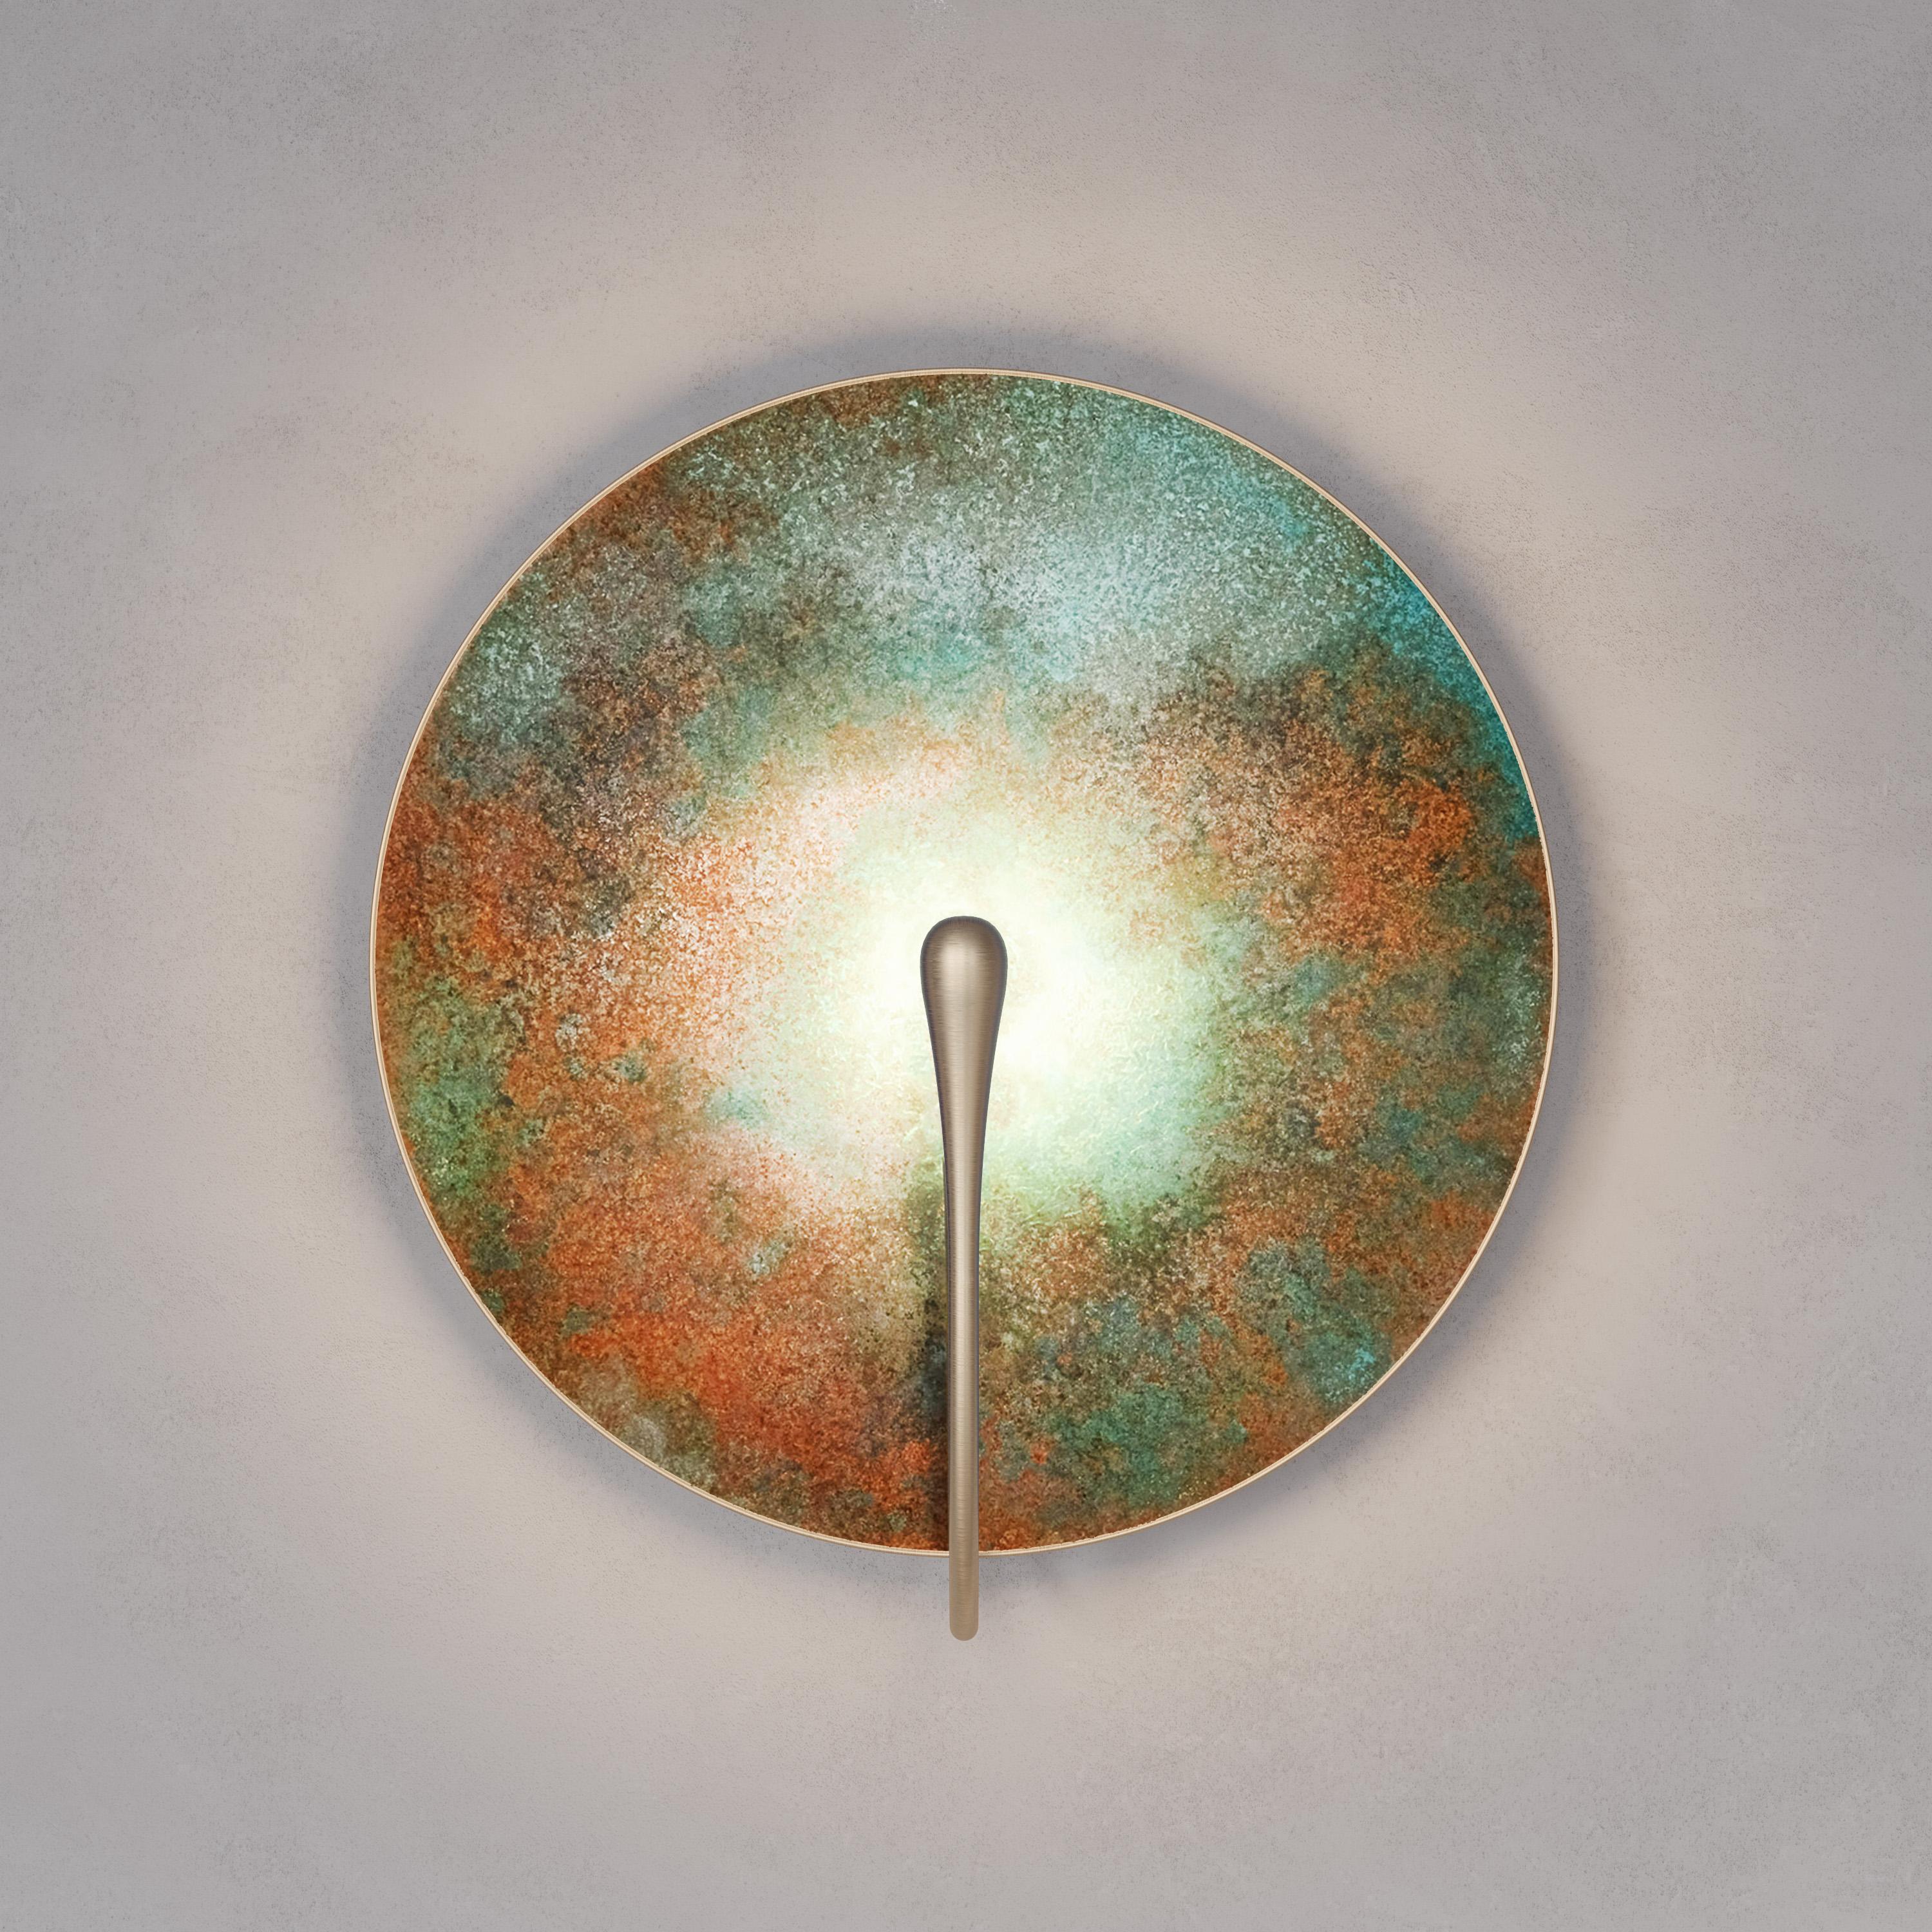 A gentle Silhouette of circular plate makes up this unique wall light. Inspired by planet-like appearances and textures, a verdigris and rust patina is applied to create this unique finish. Please note the process is slightly random and each plate